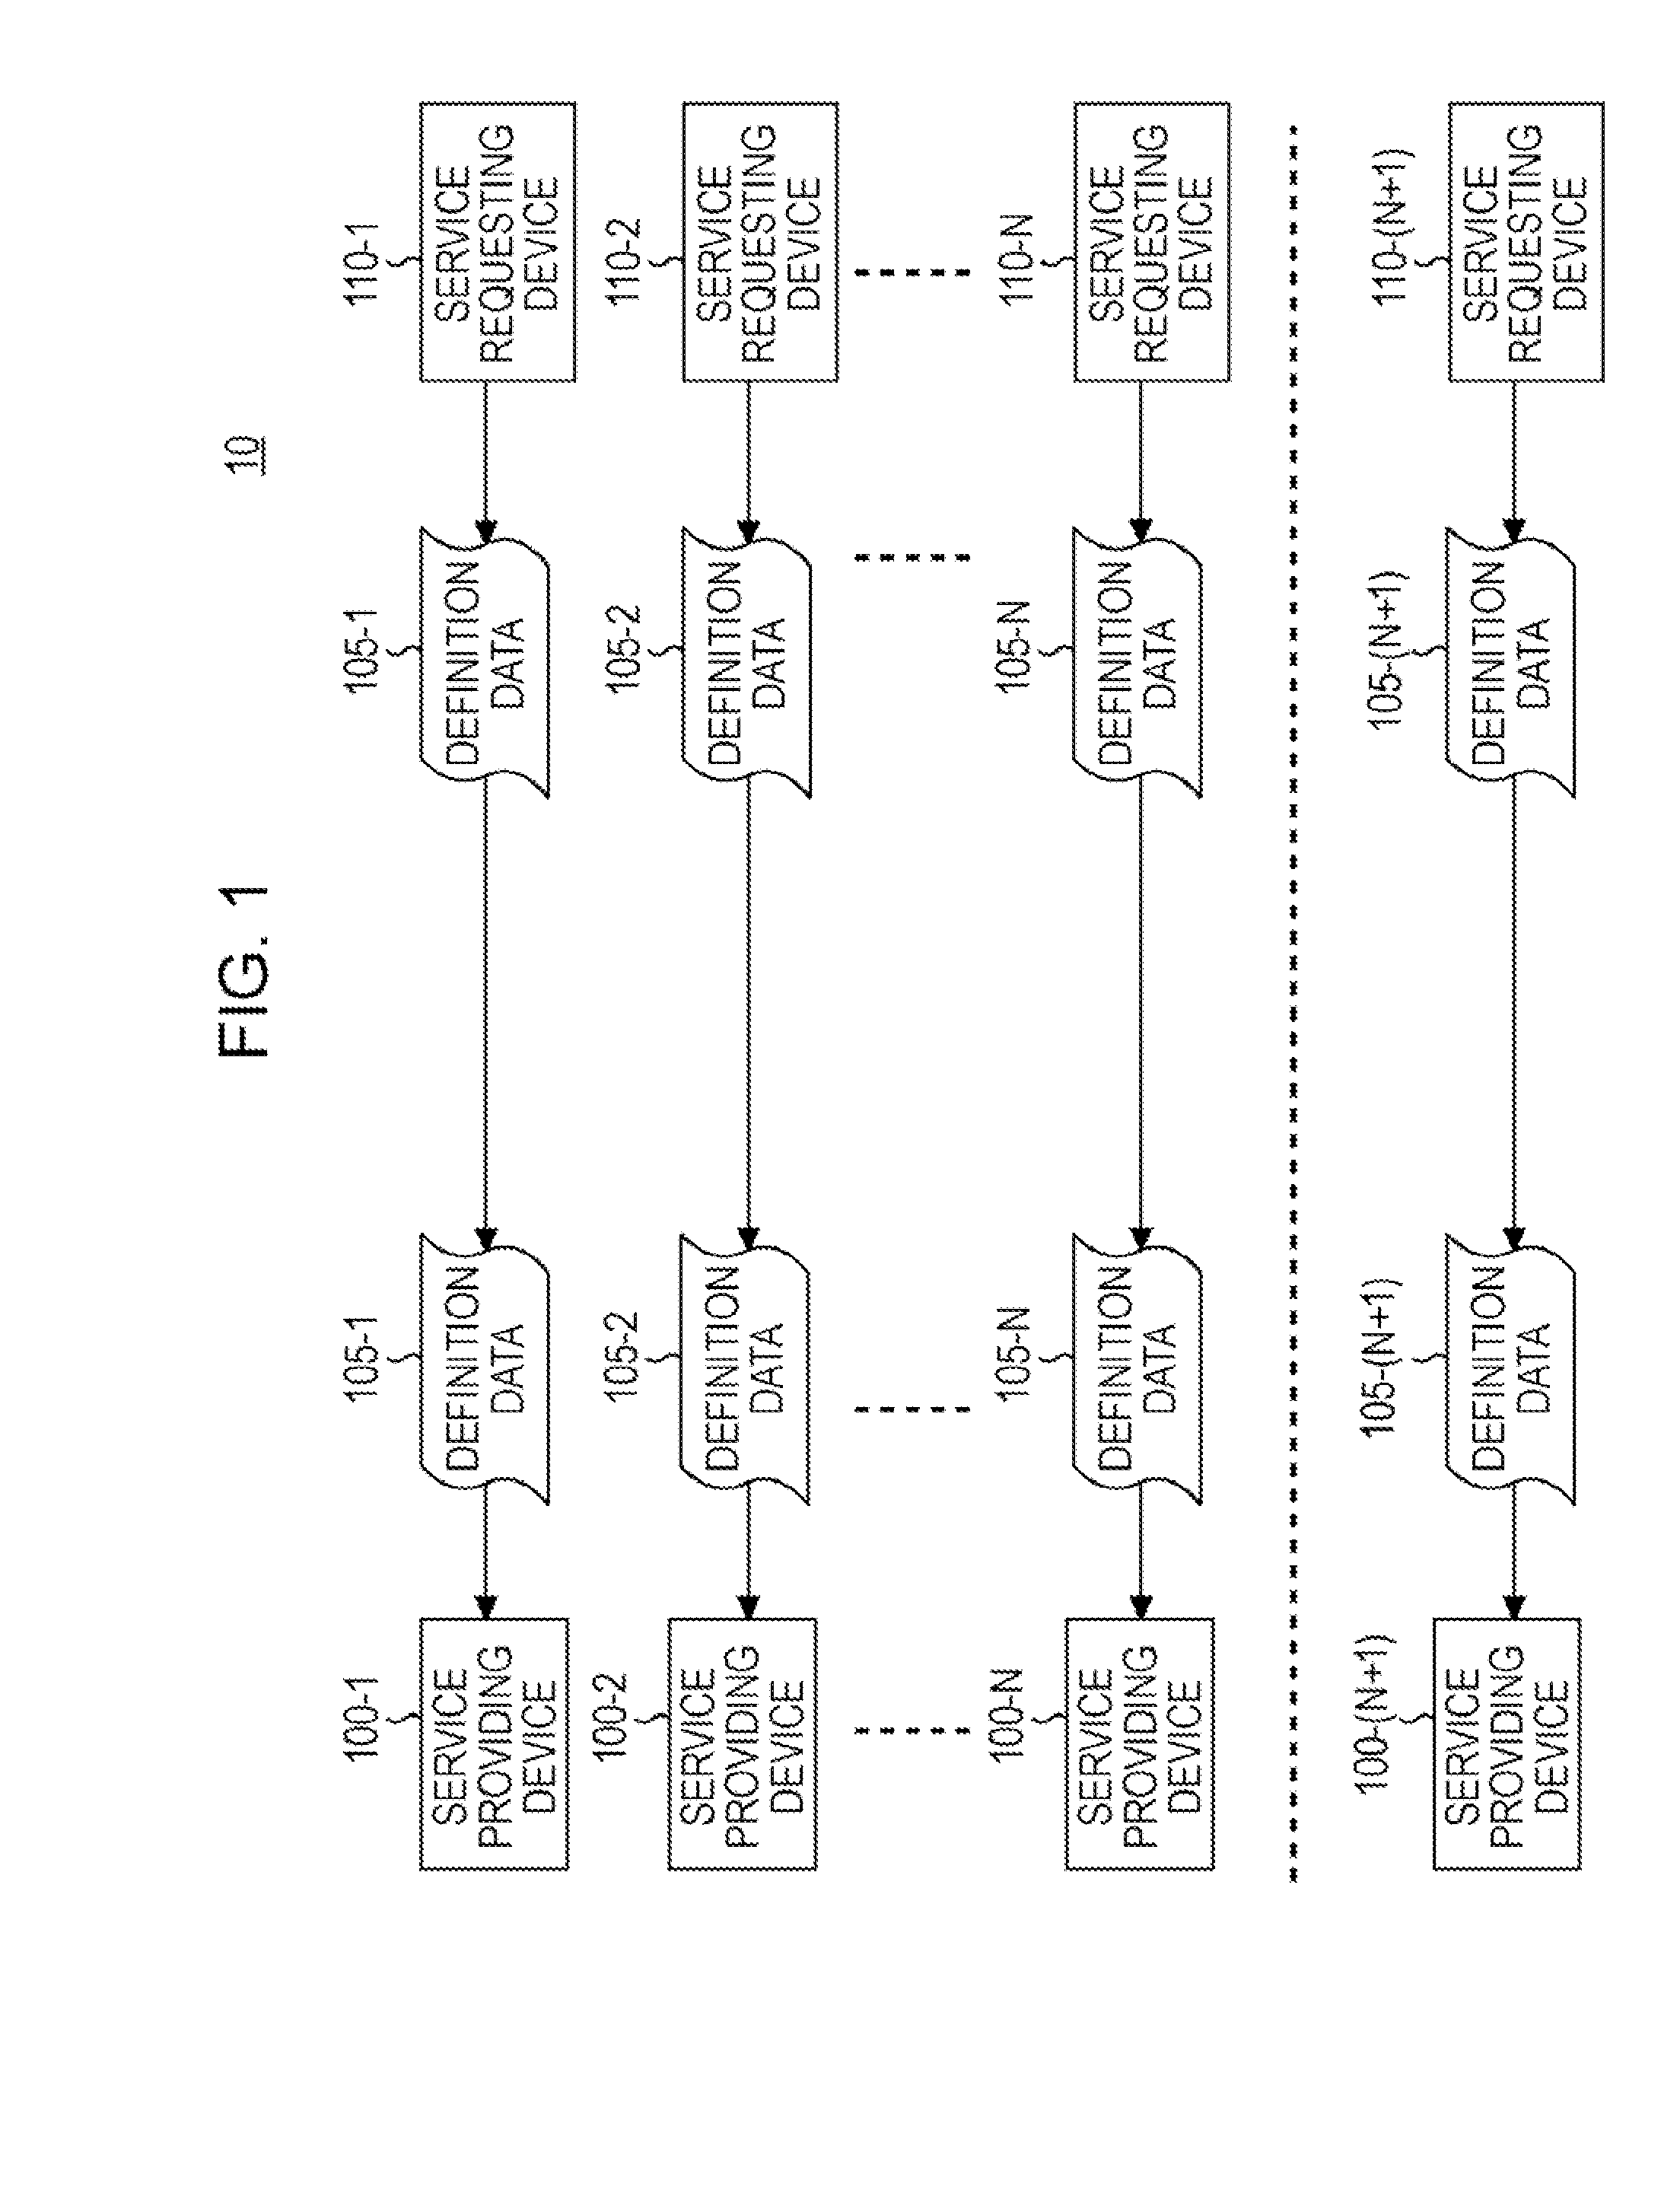 Associating a set of related web services having different input data structures with a common identification name